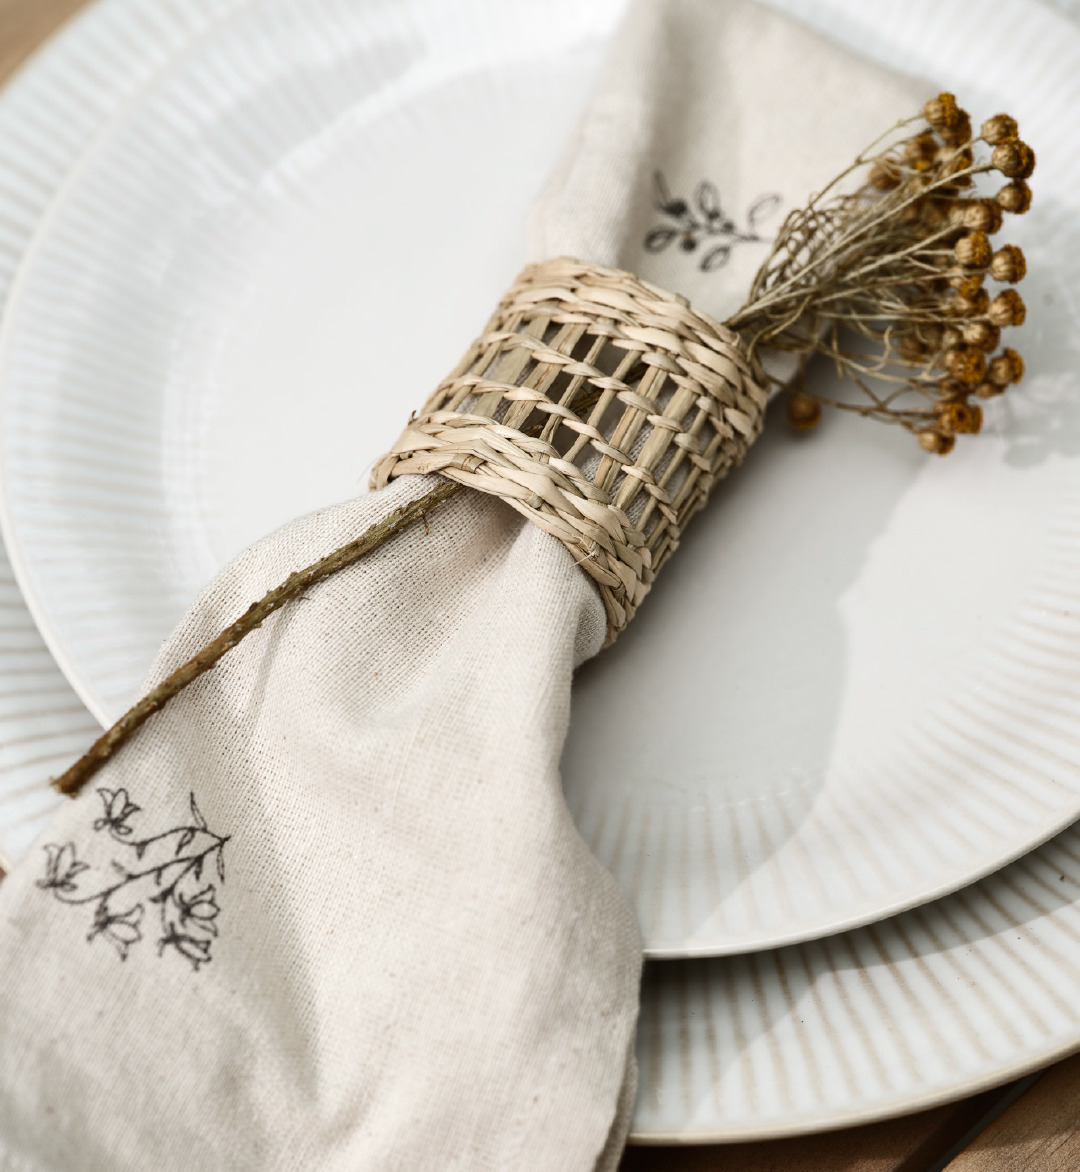 Cloth napkin and napkin ring on dinner plate